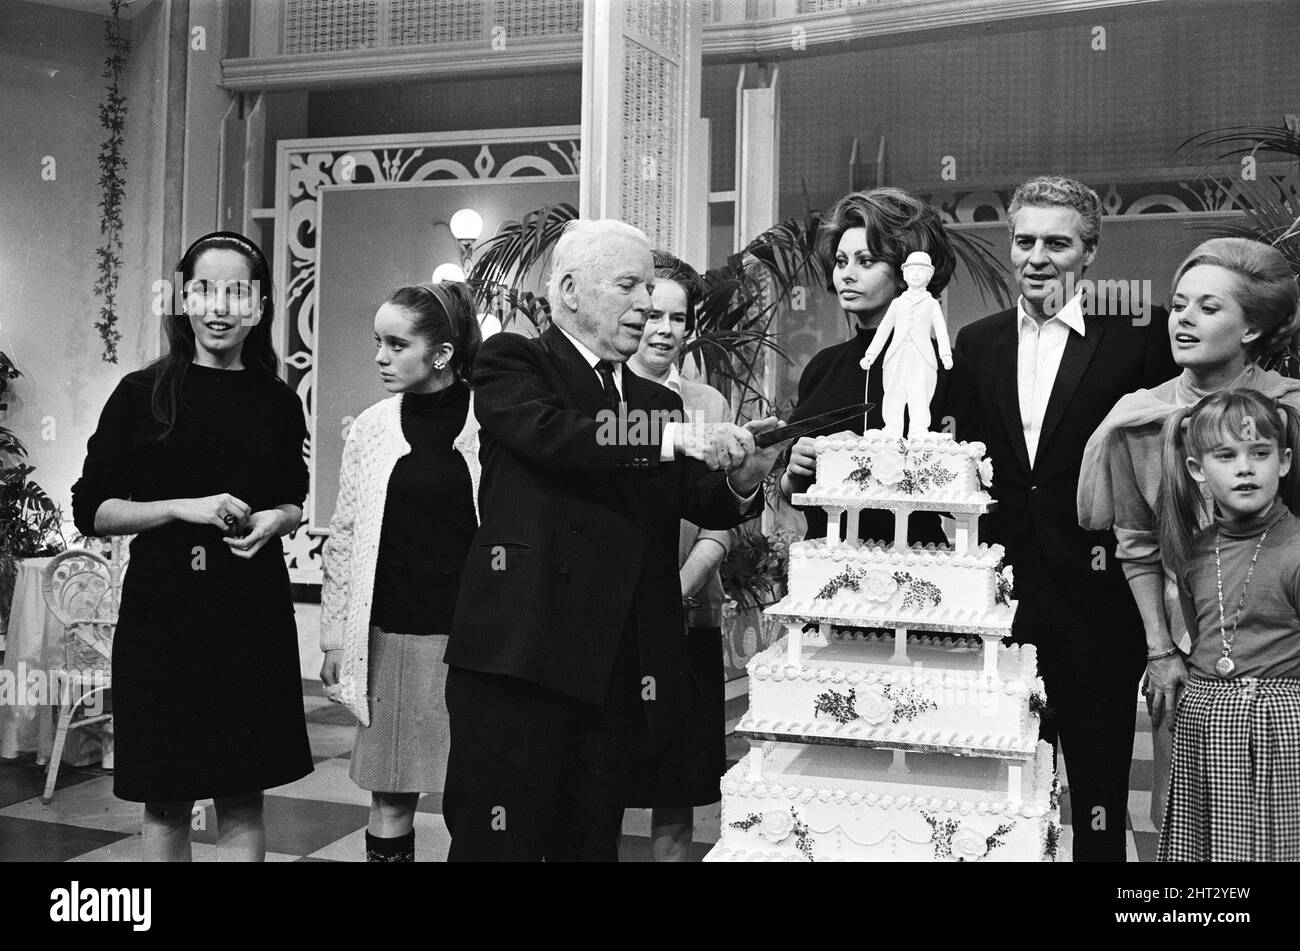 Actor and director Charlie Chaplin legend of the silent movies celebrates his 77th birthday on the set at Pinewood where he is making a new film 'Countess from Hong Kong'. Pictured, Charlie Chaplin cutting his cake with Sophia Loren, Sydney Chaplin (Chaplin's son), Tippi Hedren and her daughter Melanie Griffith. 15th April 1966. Stock Photo